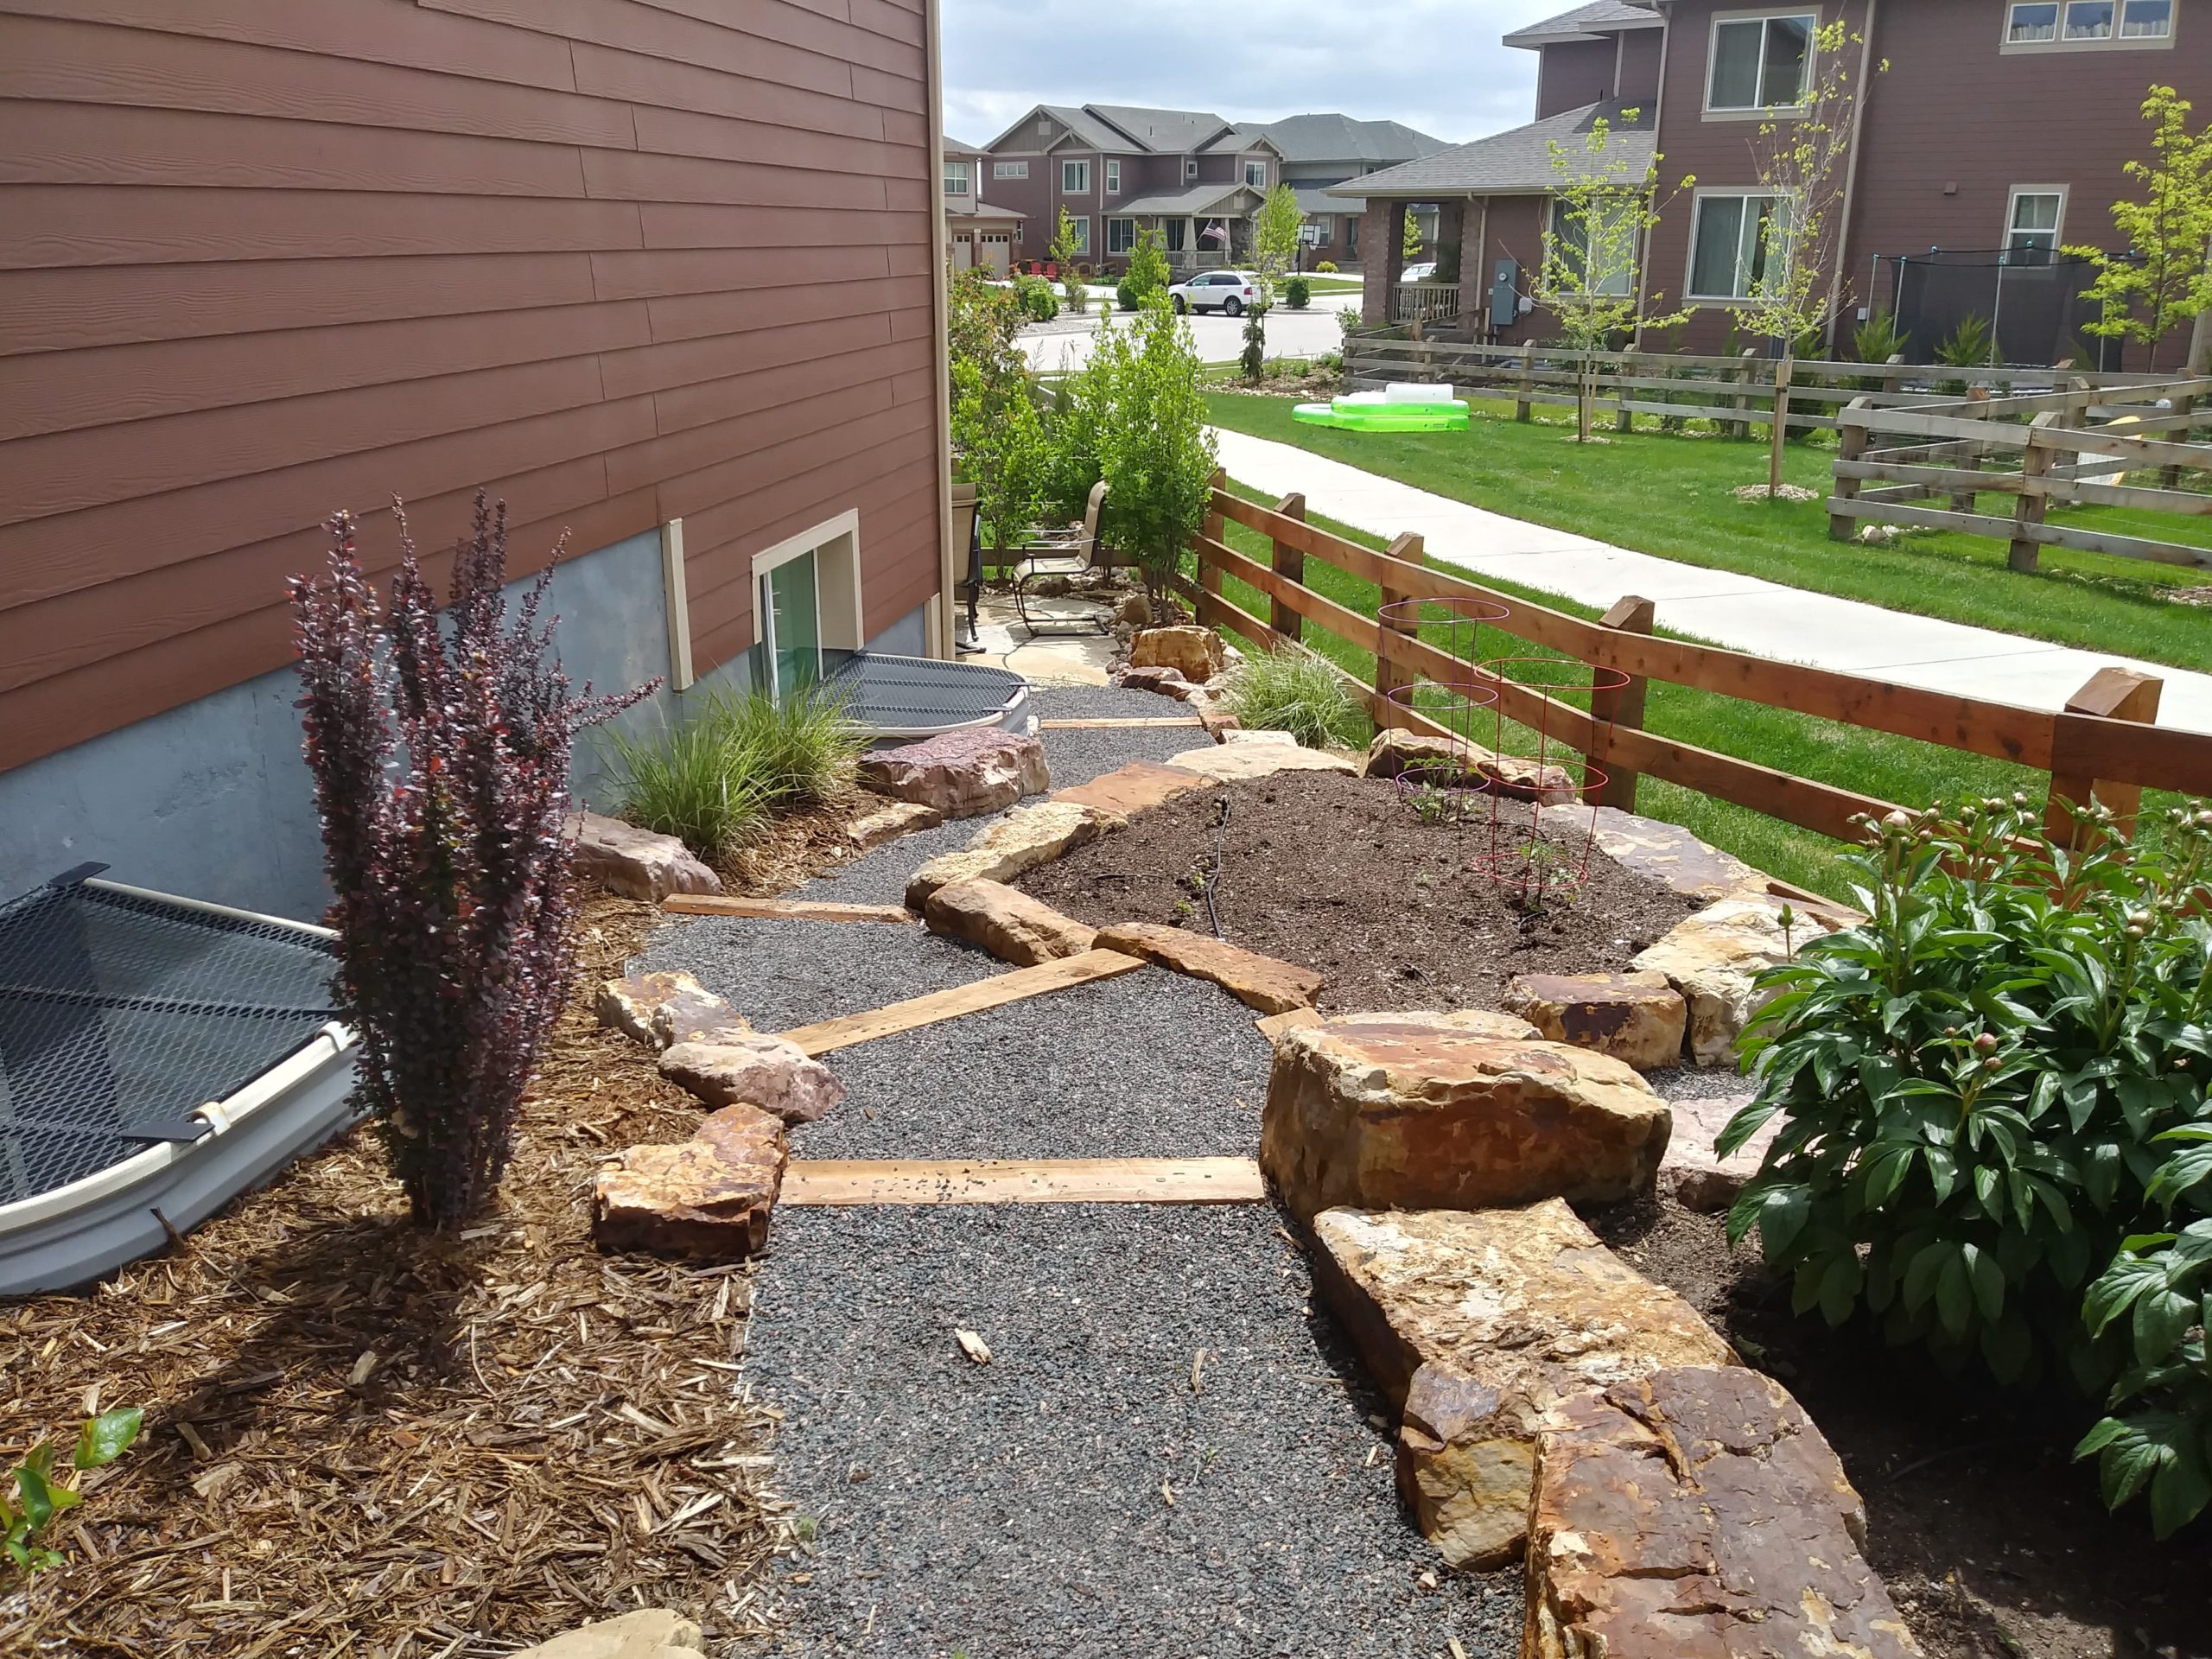 Gravel path with wood steps. Edged with large rocks and mulch beds with plants and bushes.